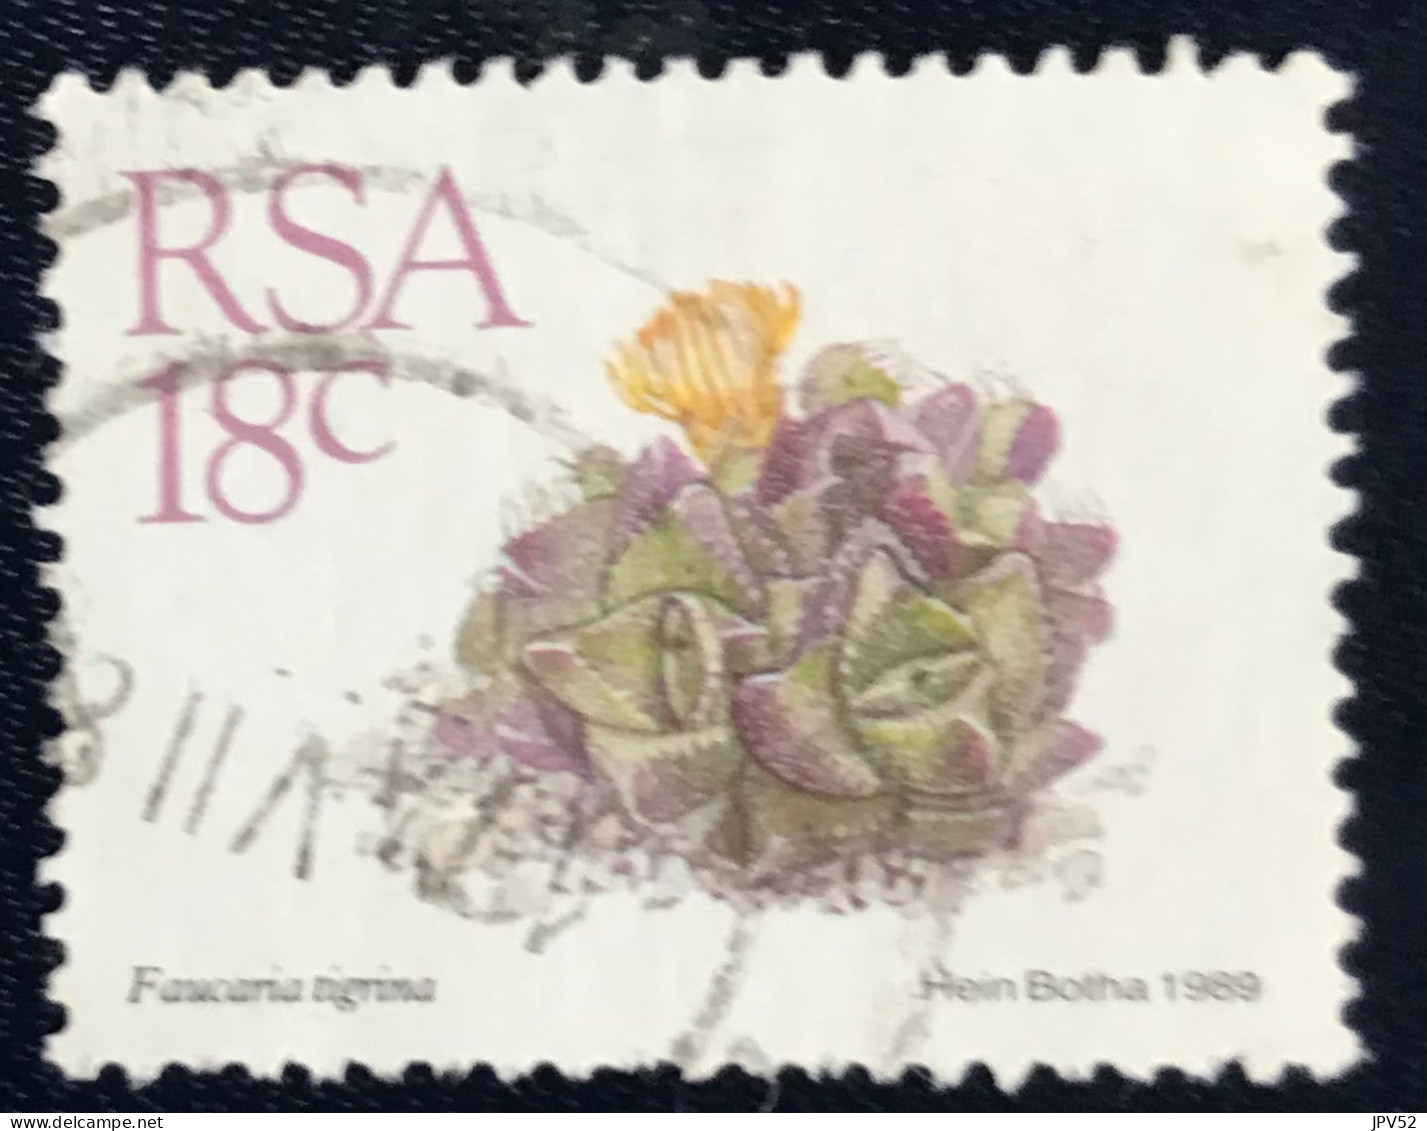 RSA - South Africa - Suid-Afrika  - C18/7 - 1989 - (°)used - Michel 770 - Vetplanten - Used Stamps